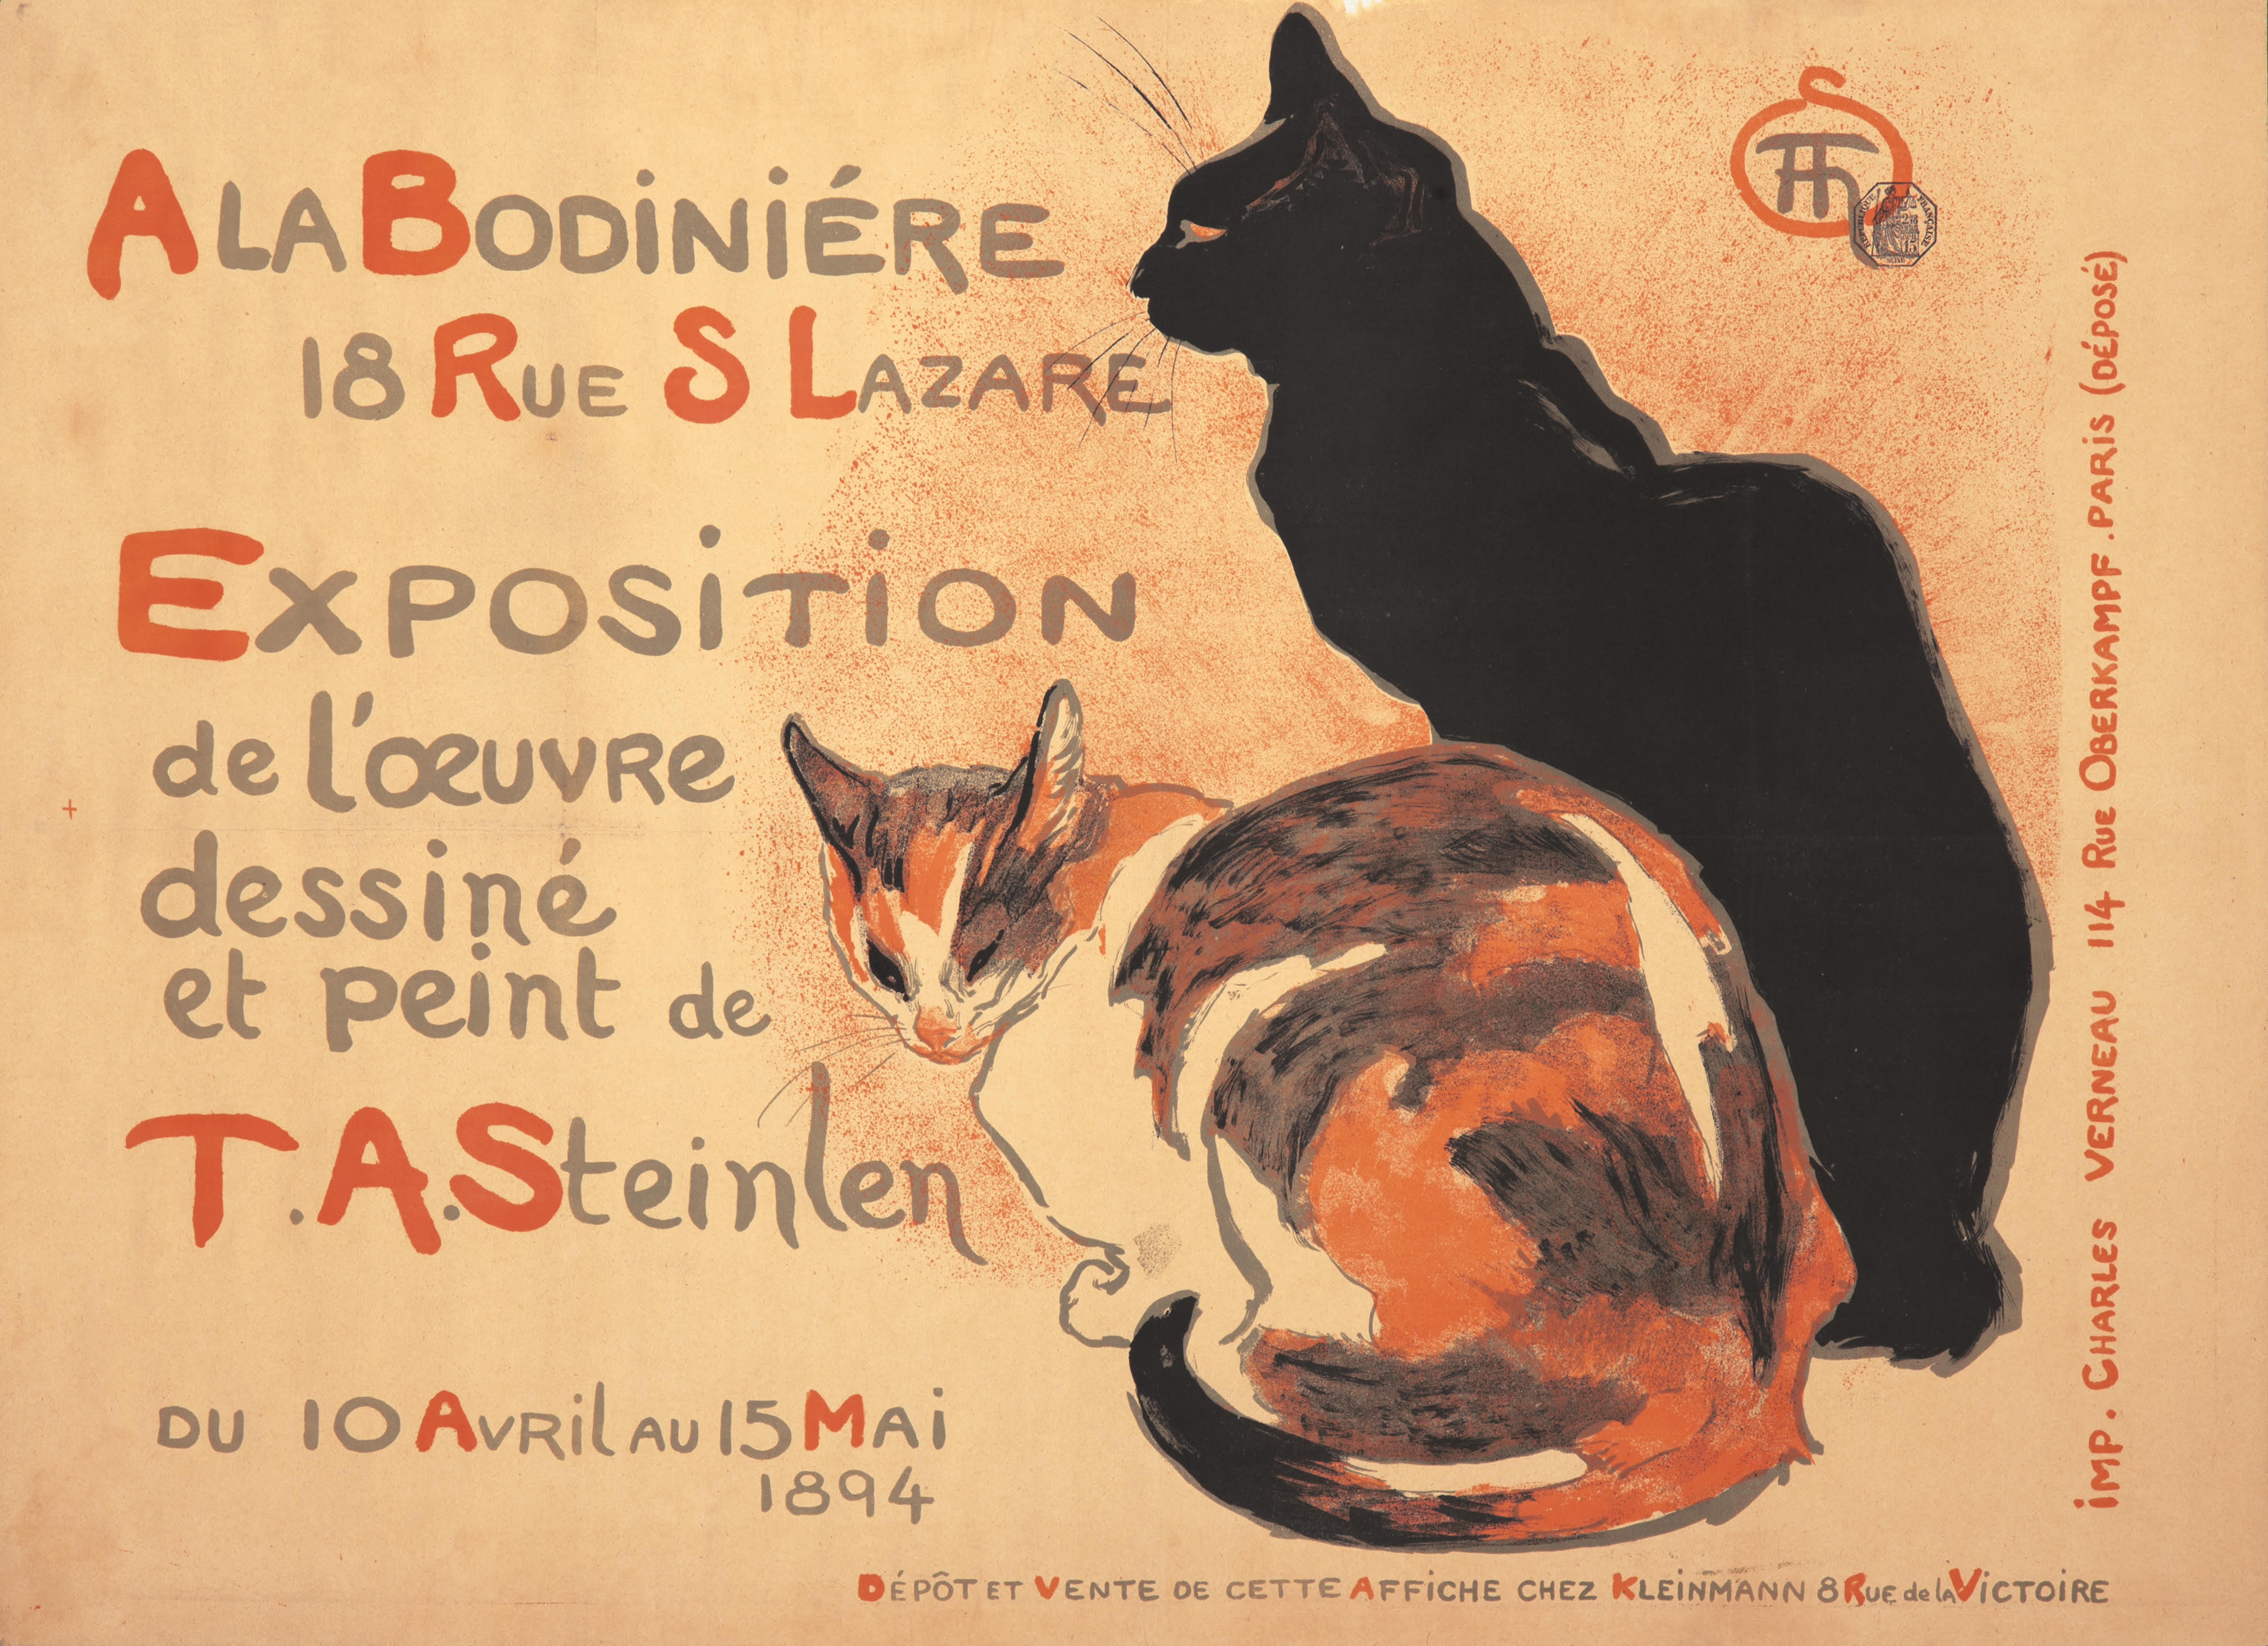 The completed version of the 1894 Théophile-Alexandre Steinlen poster, advertising his first gallery show. It features a calico cat and a black cat, both seated.